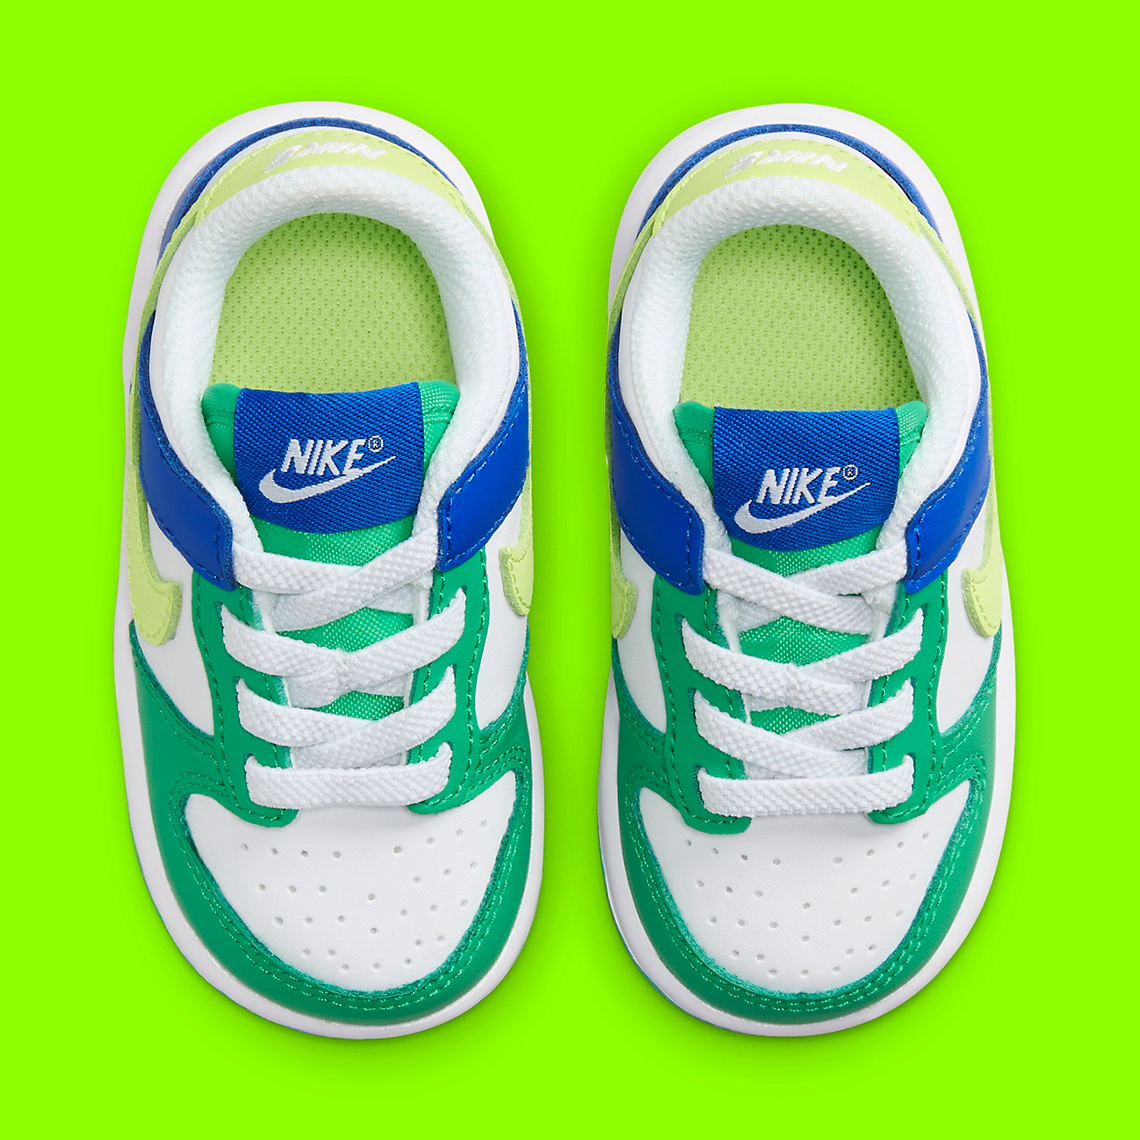 nike athletics west shoes price philippines women Td Green Royal Volt Fv4501 100 3